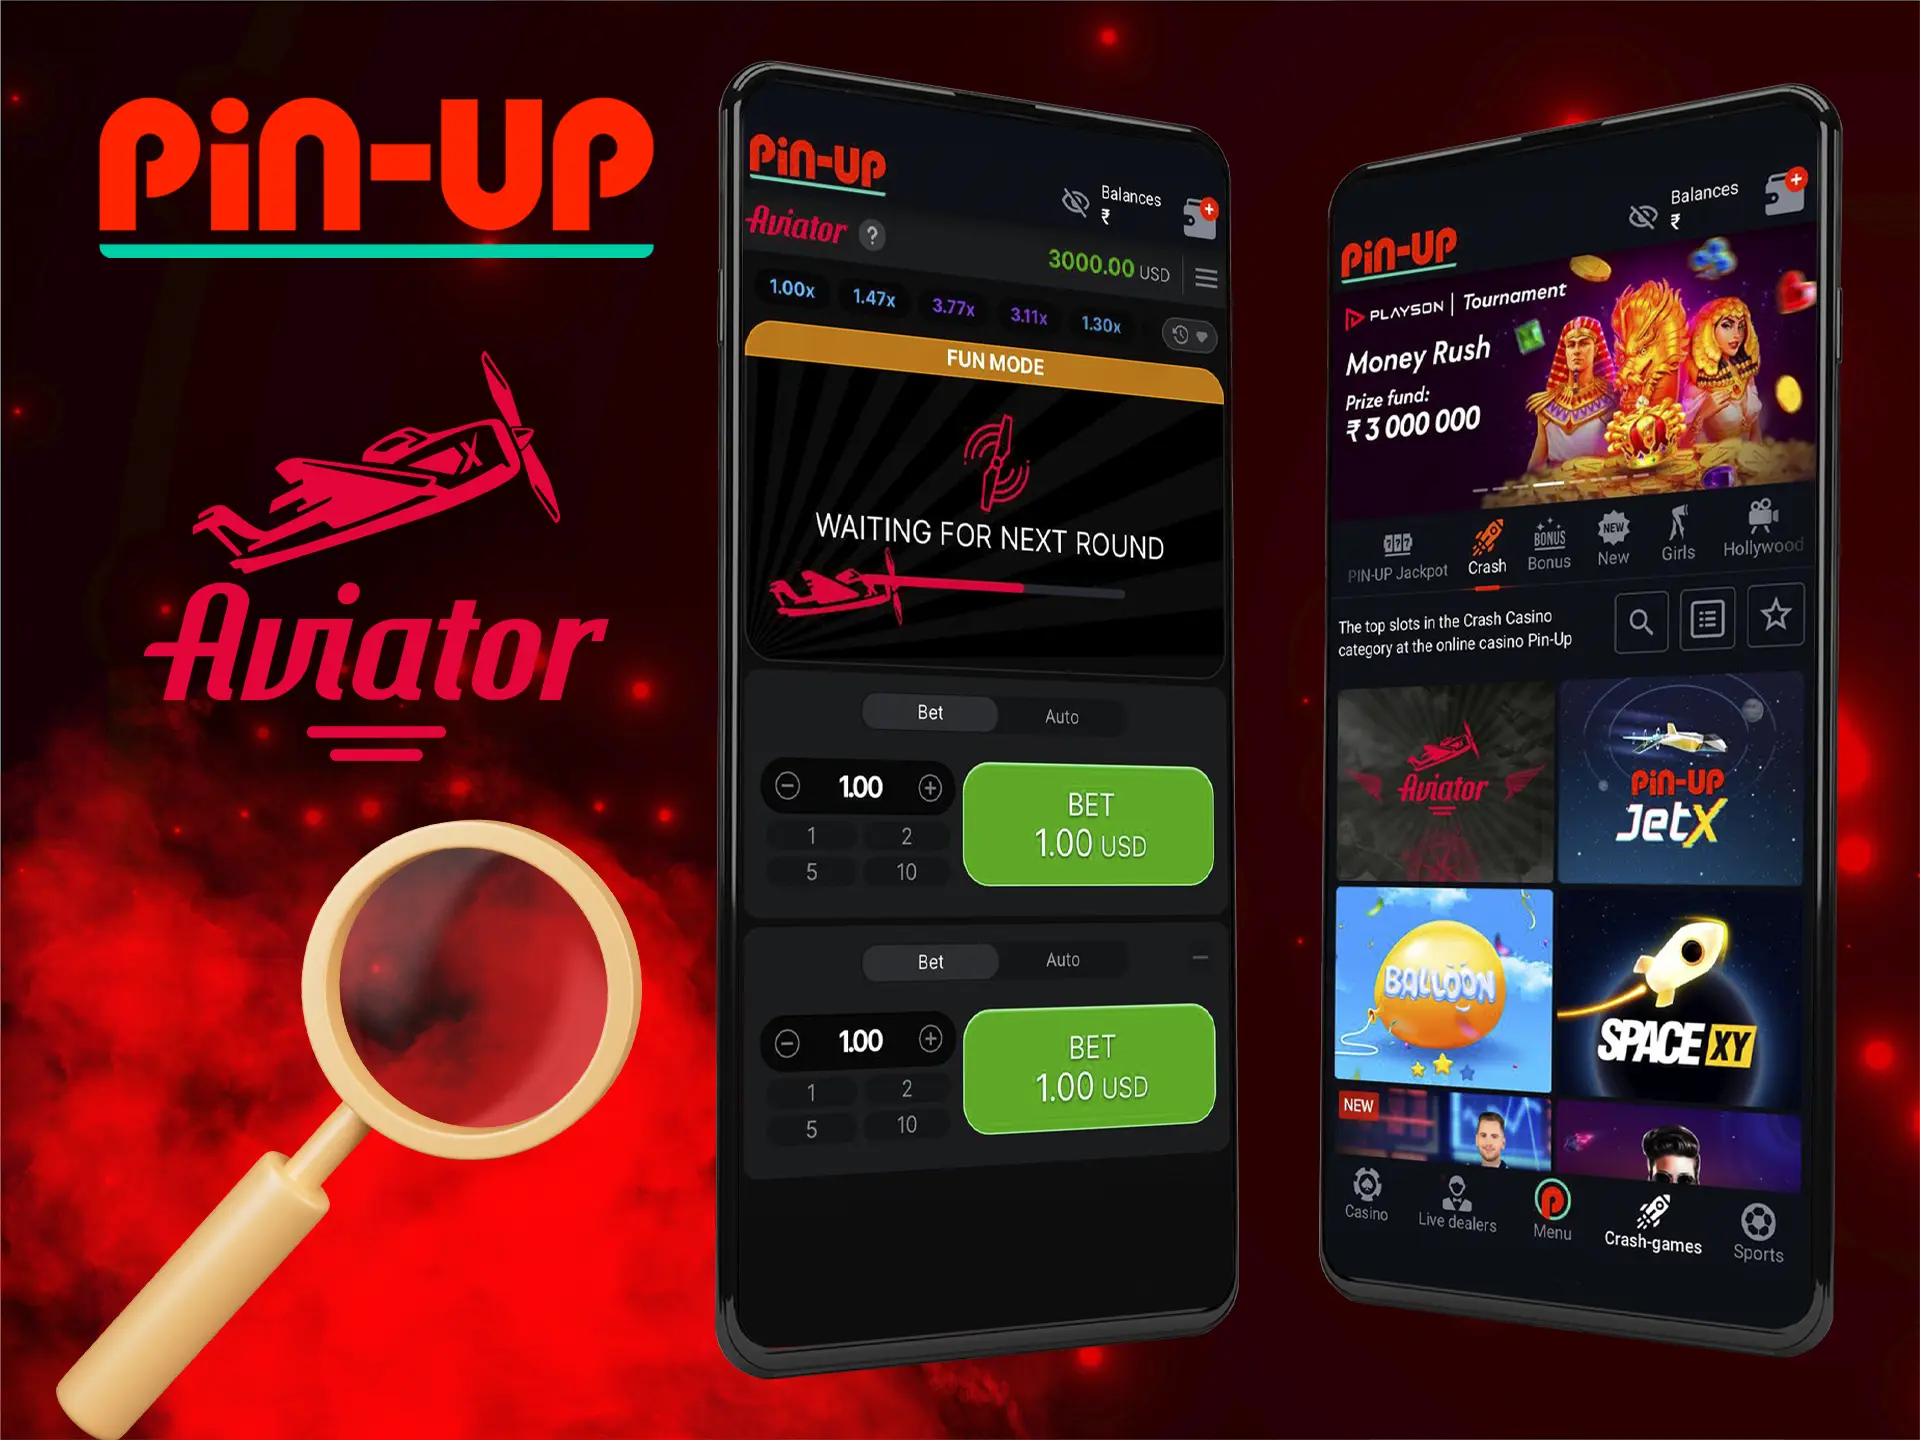 Note the main differences between the mobile version he Pin Up app for the Aviator game.